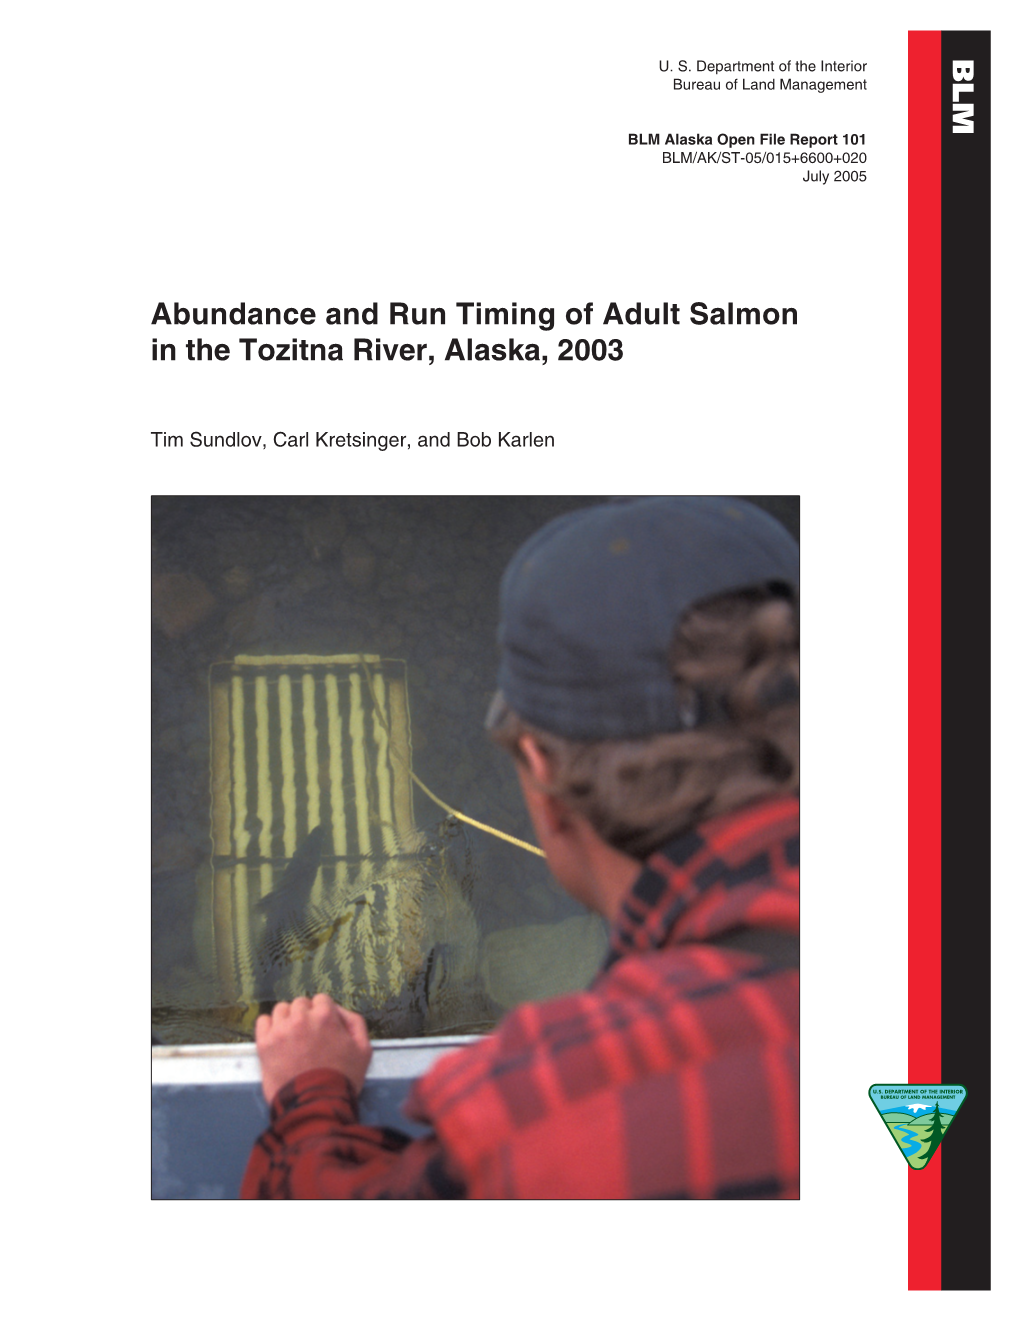 BLM Abundance and Run Timing of Adult Salmon in the Tozitna River, Alaska, 2003